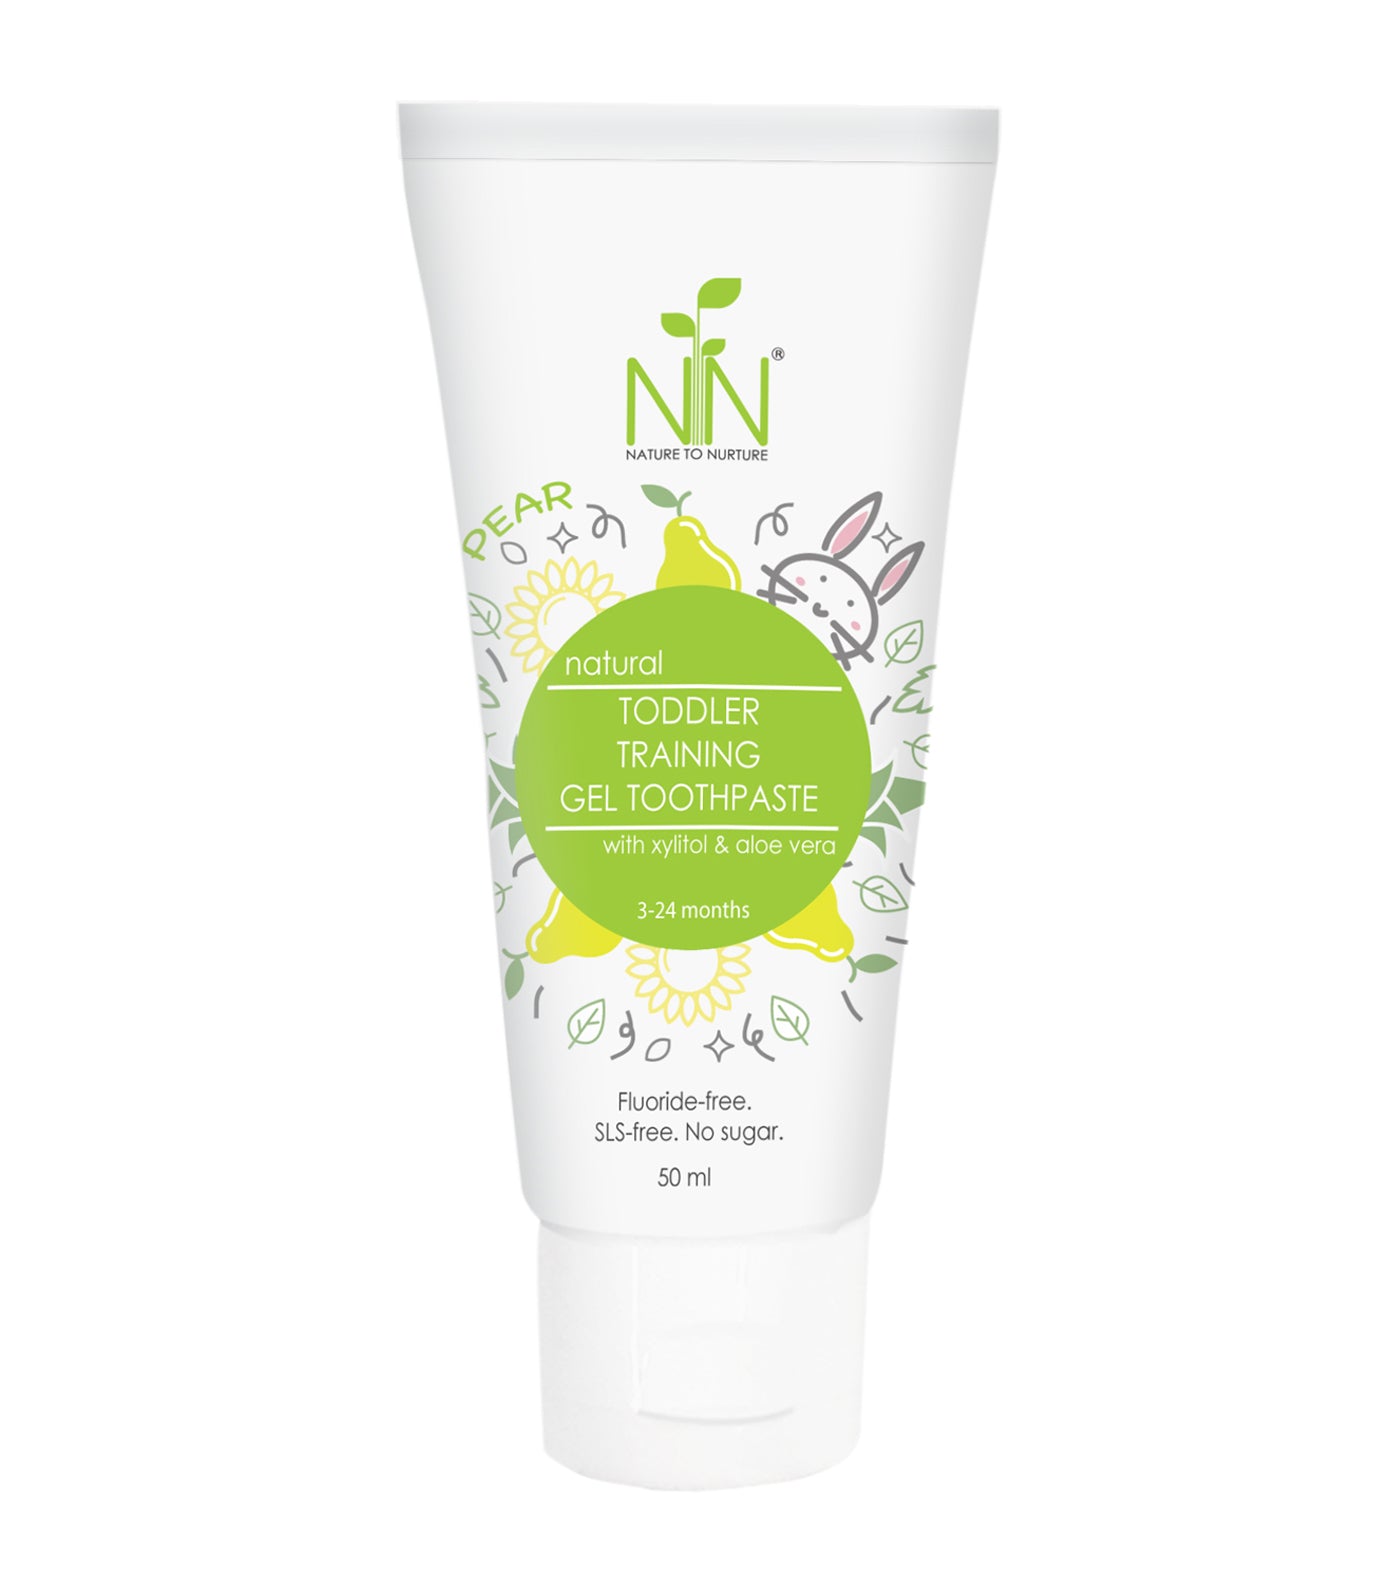 Natural Toddler Training Gel Toothpaste 50mL Pear